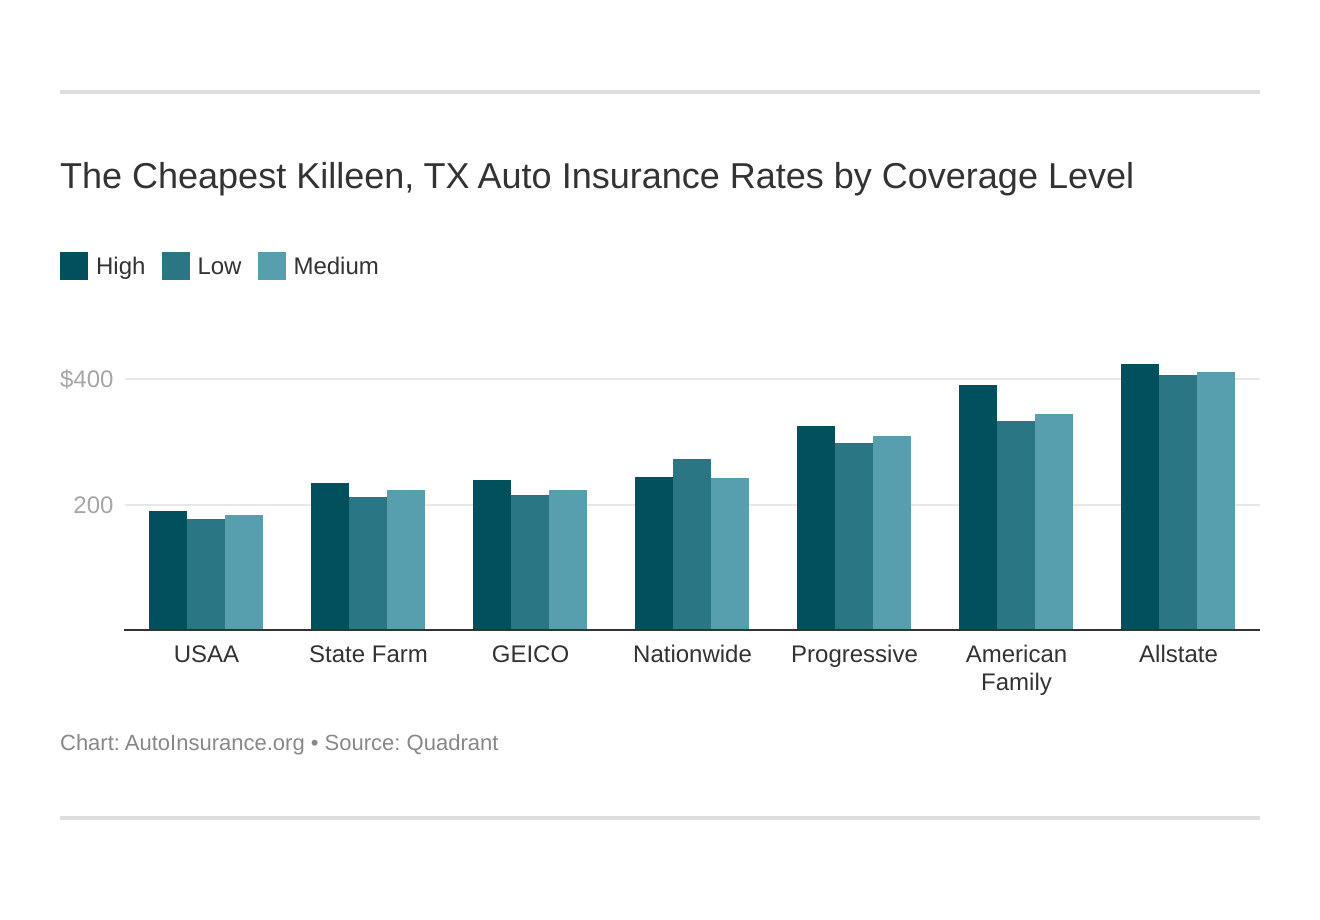 The Cheapest Killeen, TX Auto Insurance Rates by Coverage Level